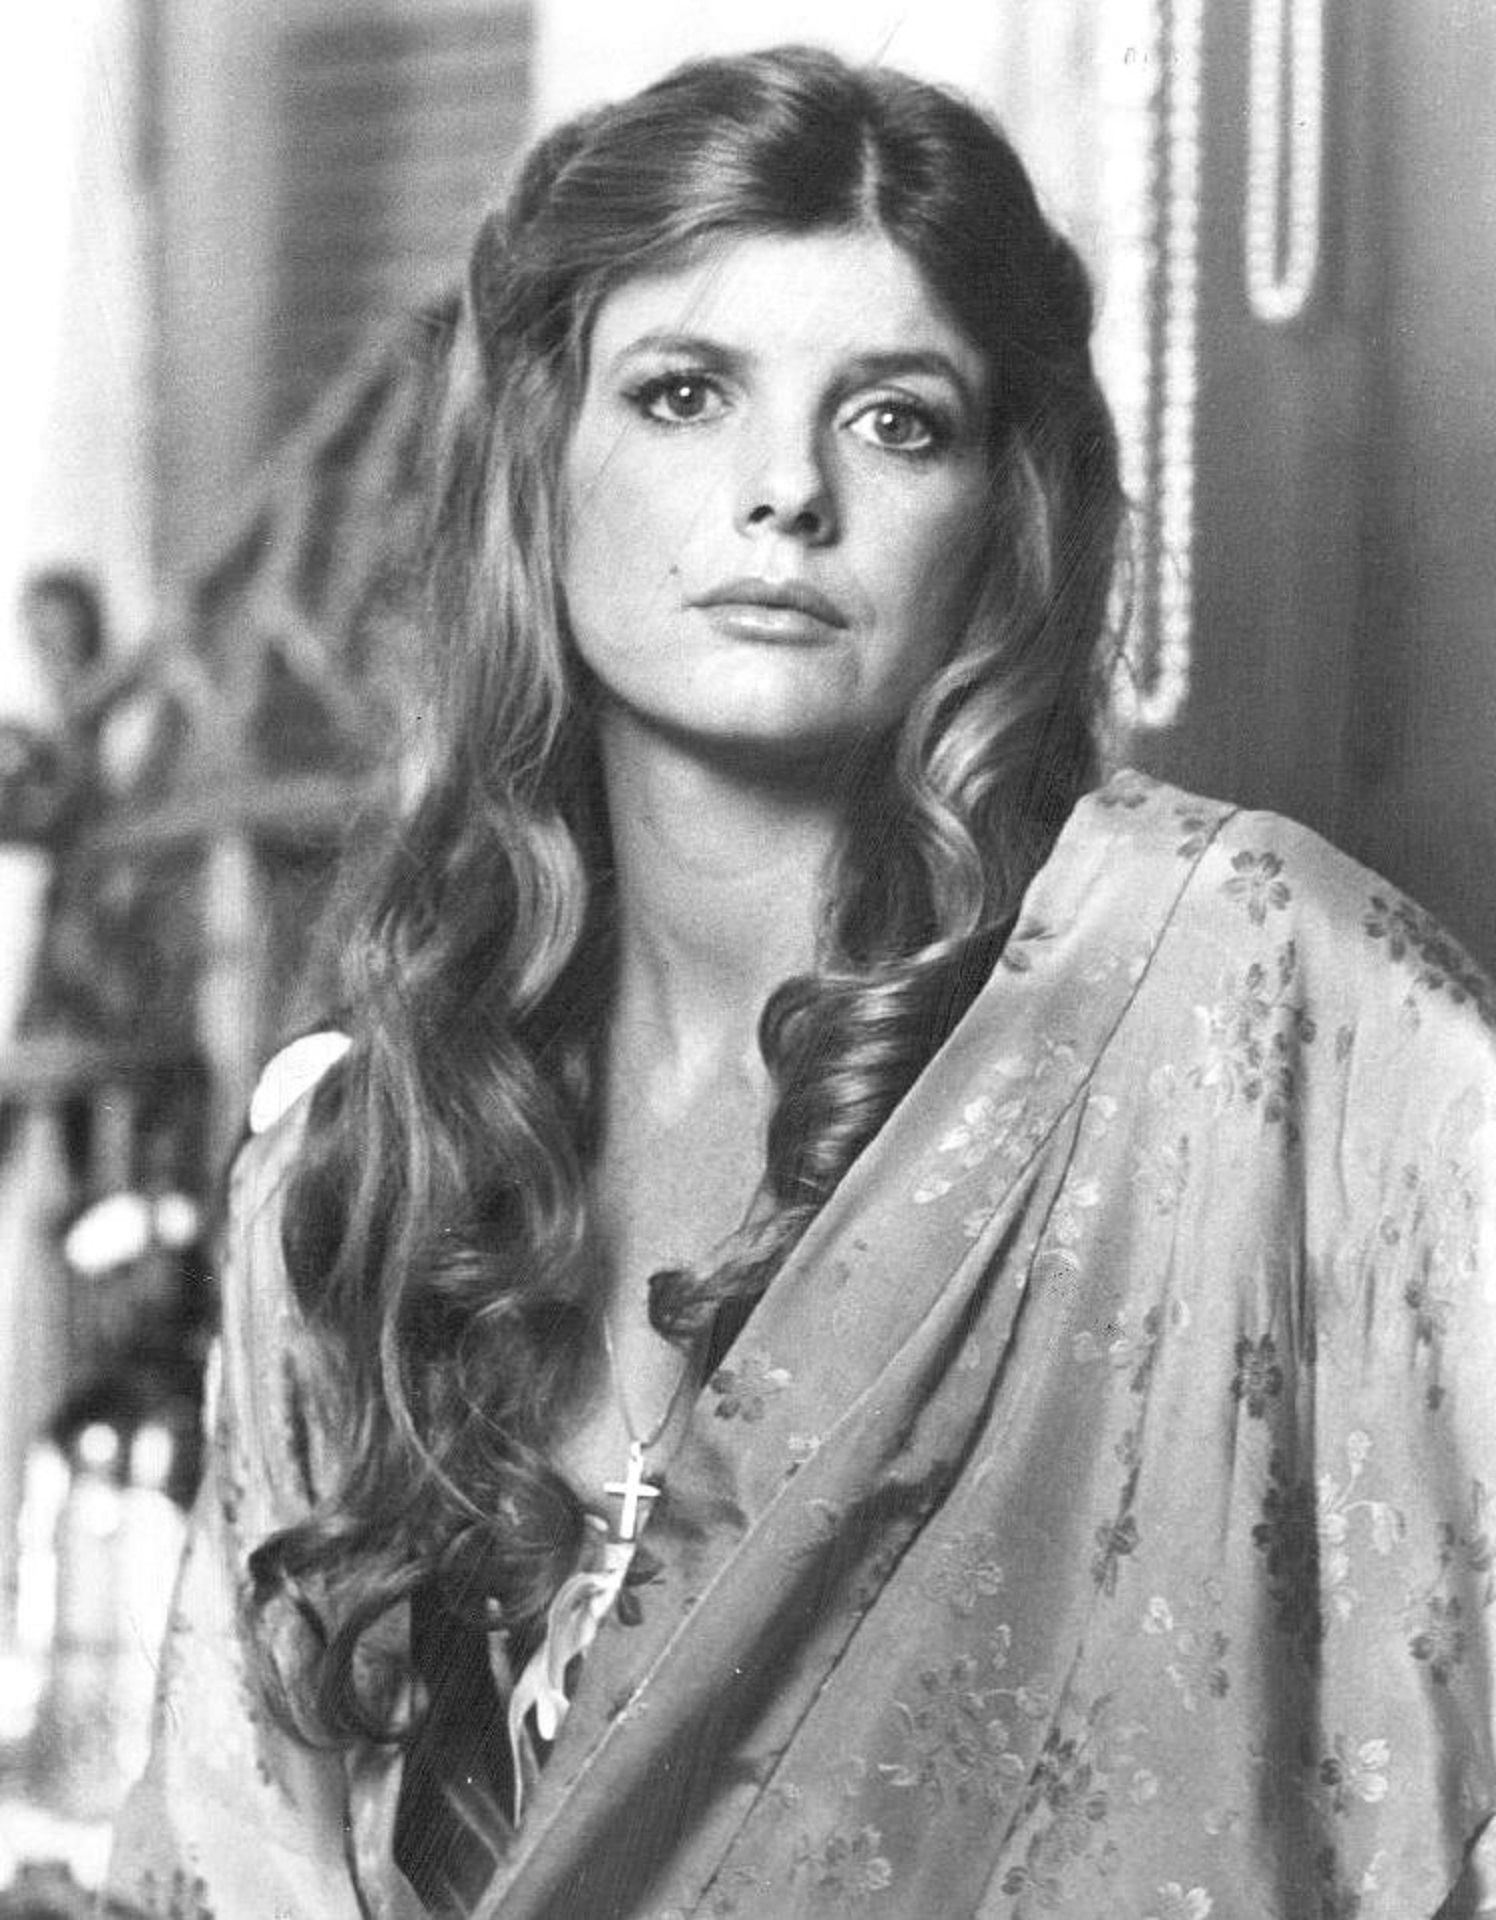 Free high resolution images katharine ross, actor, actress, celebrity, famo...